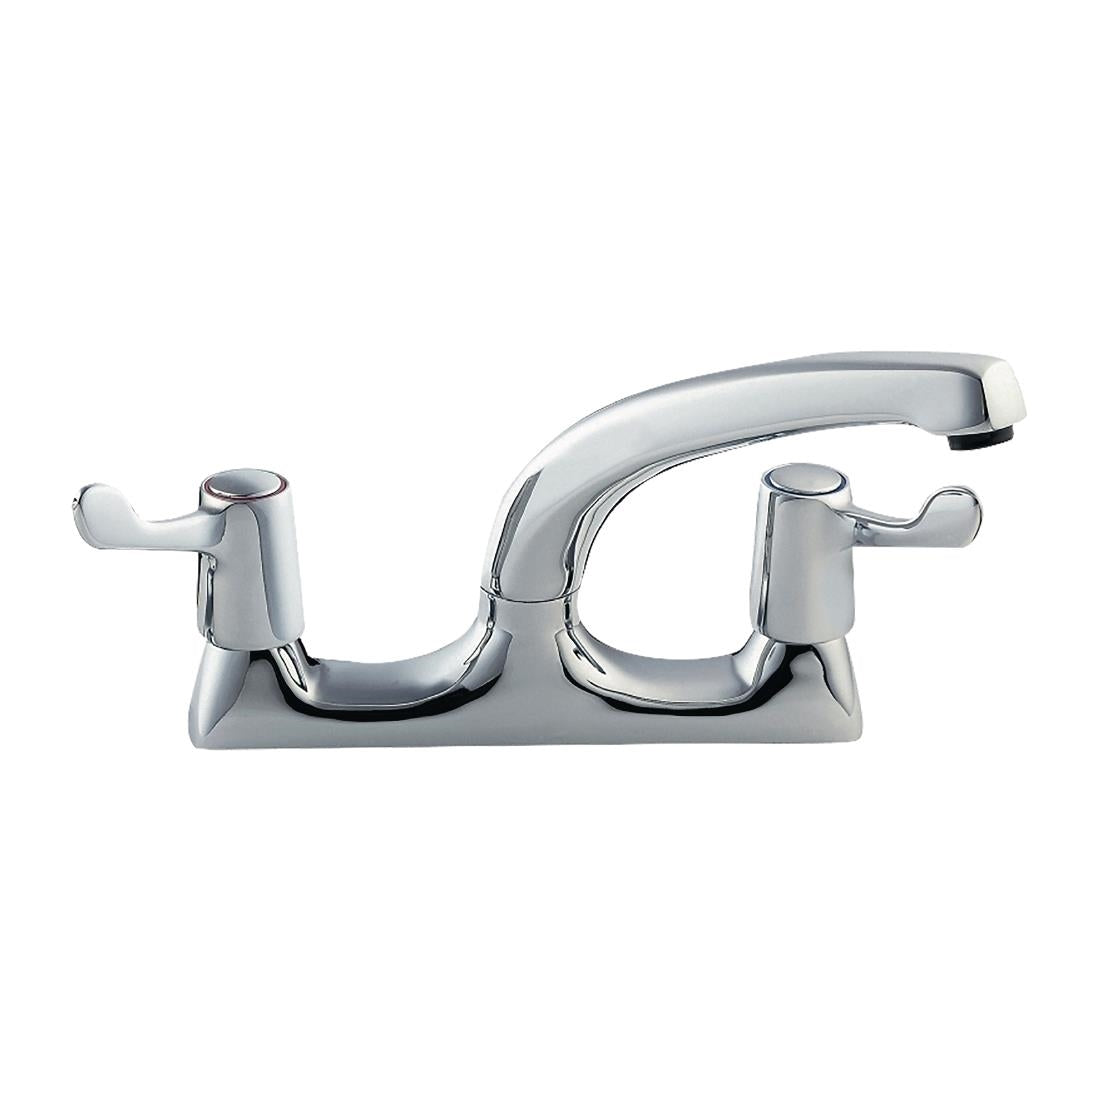 FT868 KWC DVS Deck Mounted Mixer Tap With Levers JD Catering Equipment Solutions Ltd